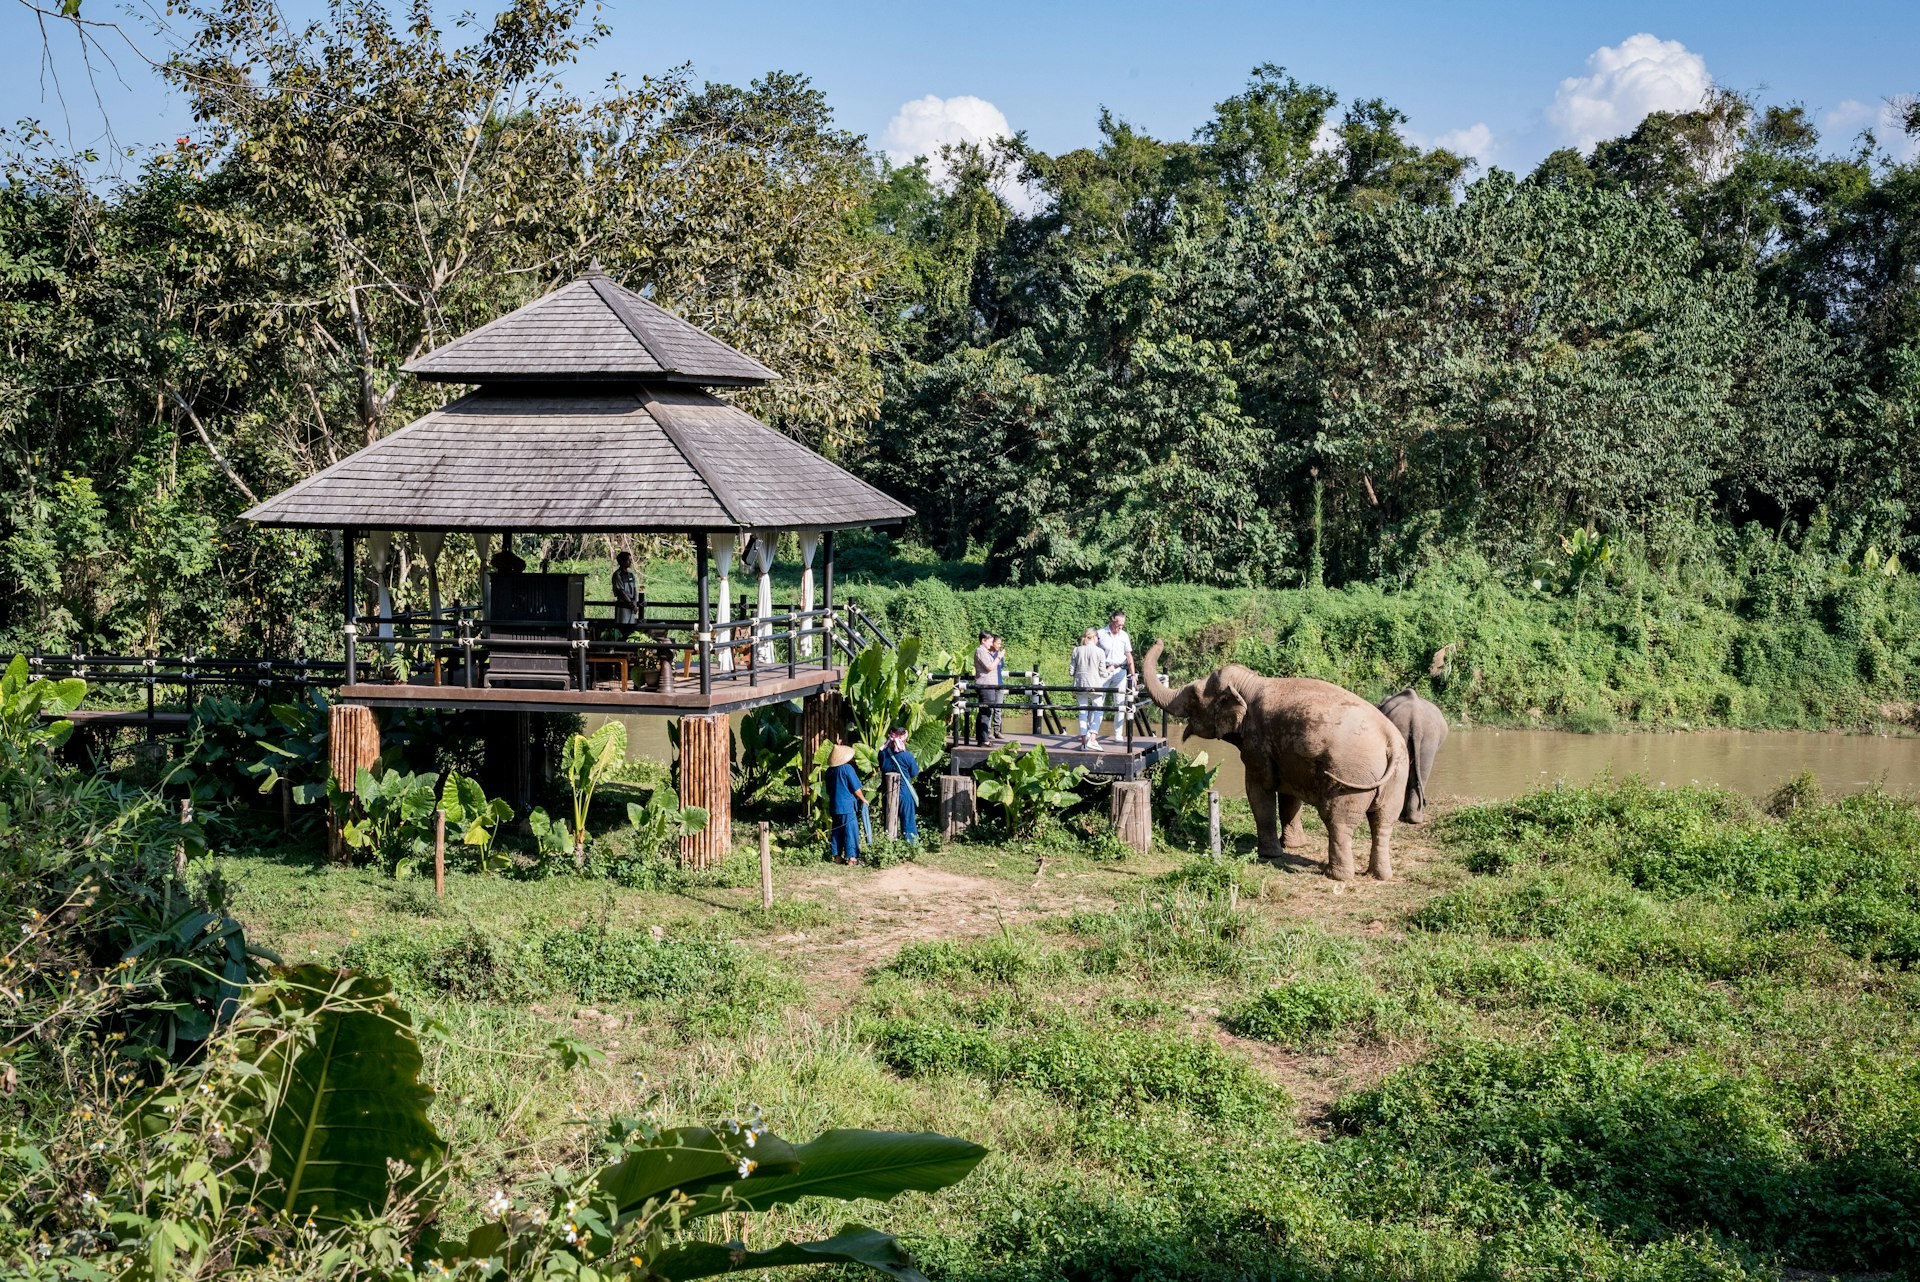 People stand on a riverside wooden decking area observing two elephants that are free to roam 